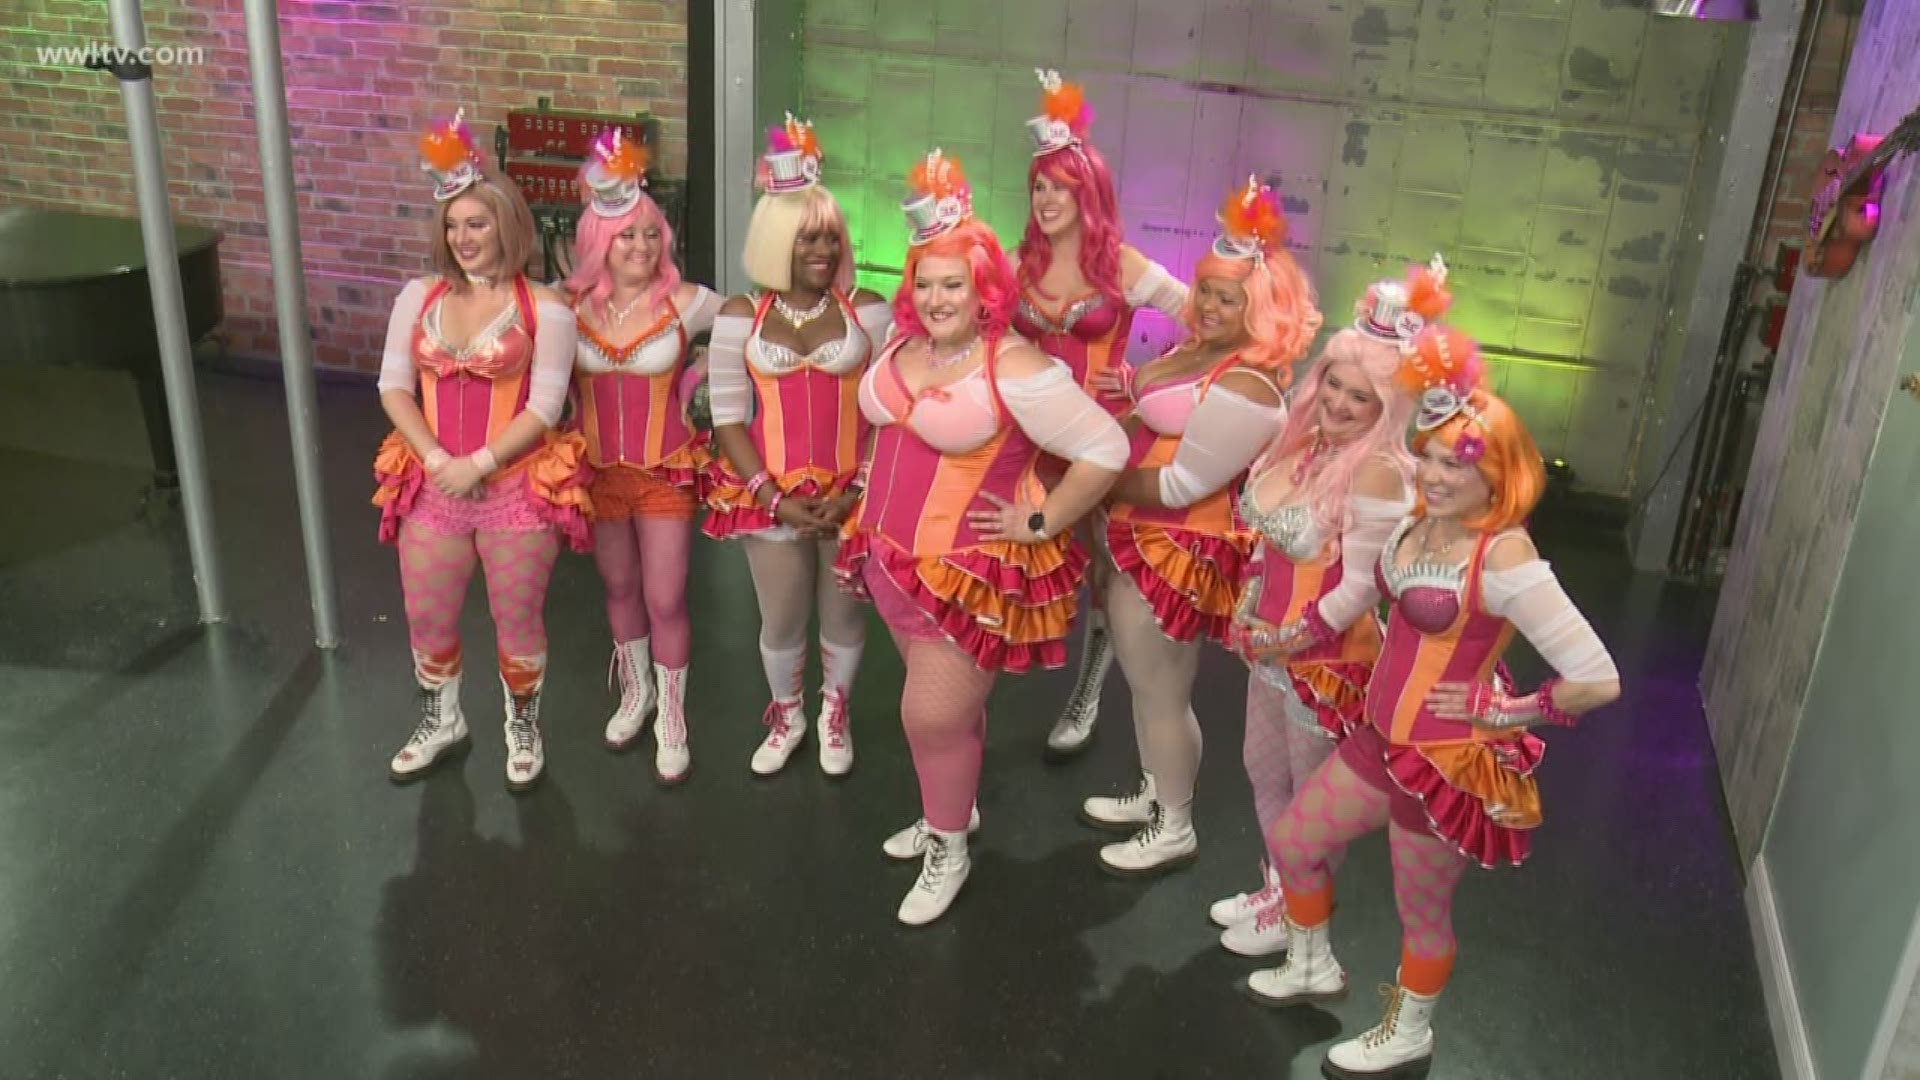 The famed New Orleans marching group is hosting a party for the purpose of helping women work  through and overcome tough situations such as domestic violence,